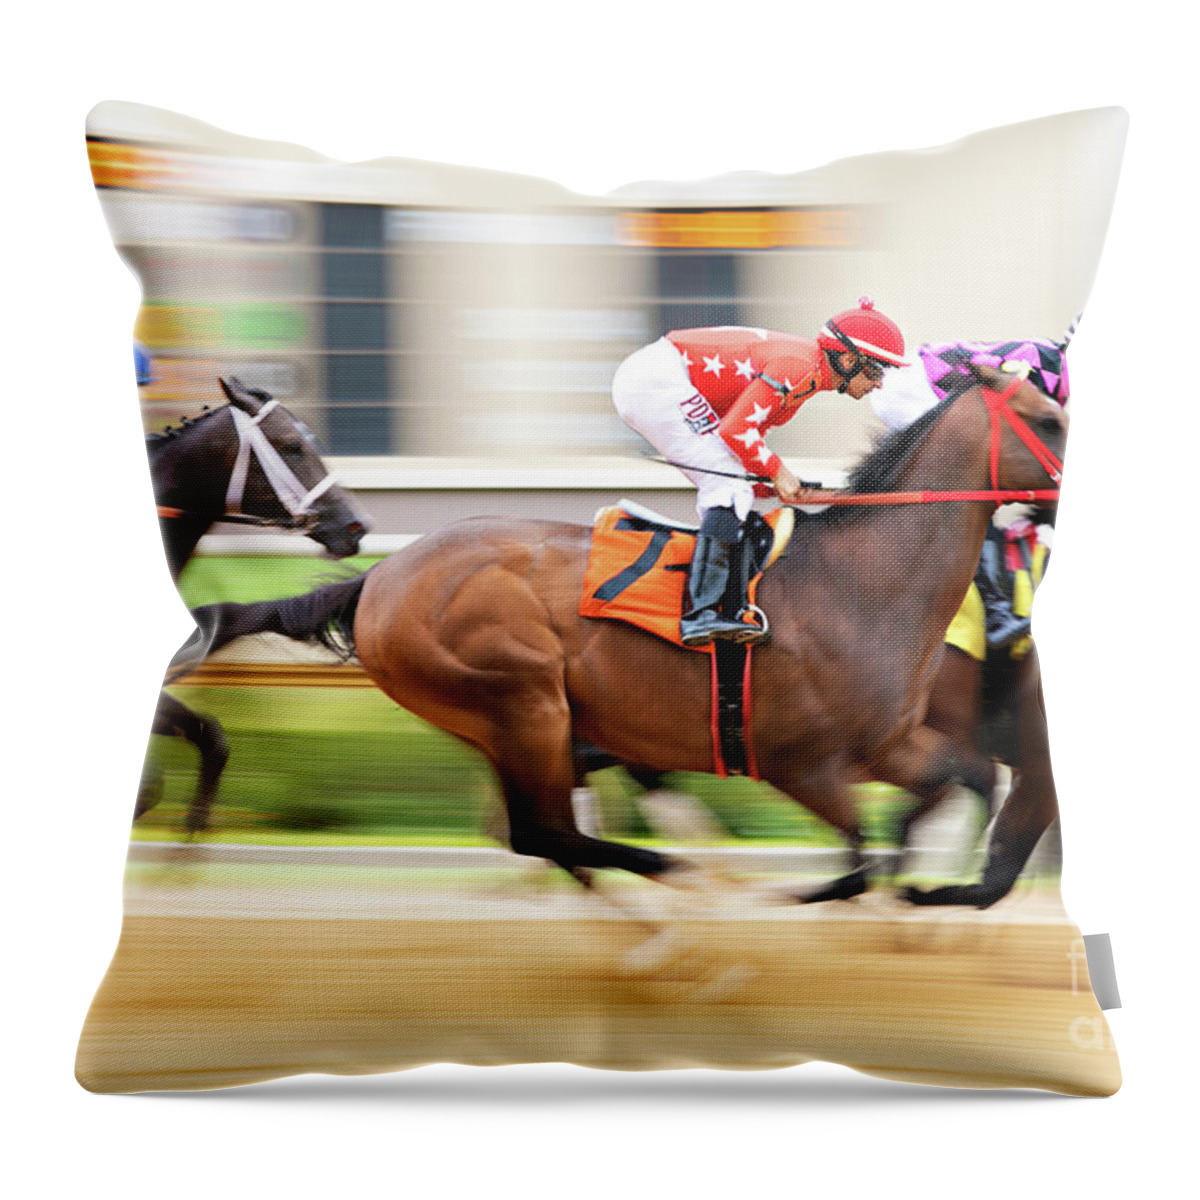 Race Throw Pillow featuring the photograph Racehorse Blurr by Terri Cage